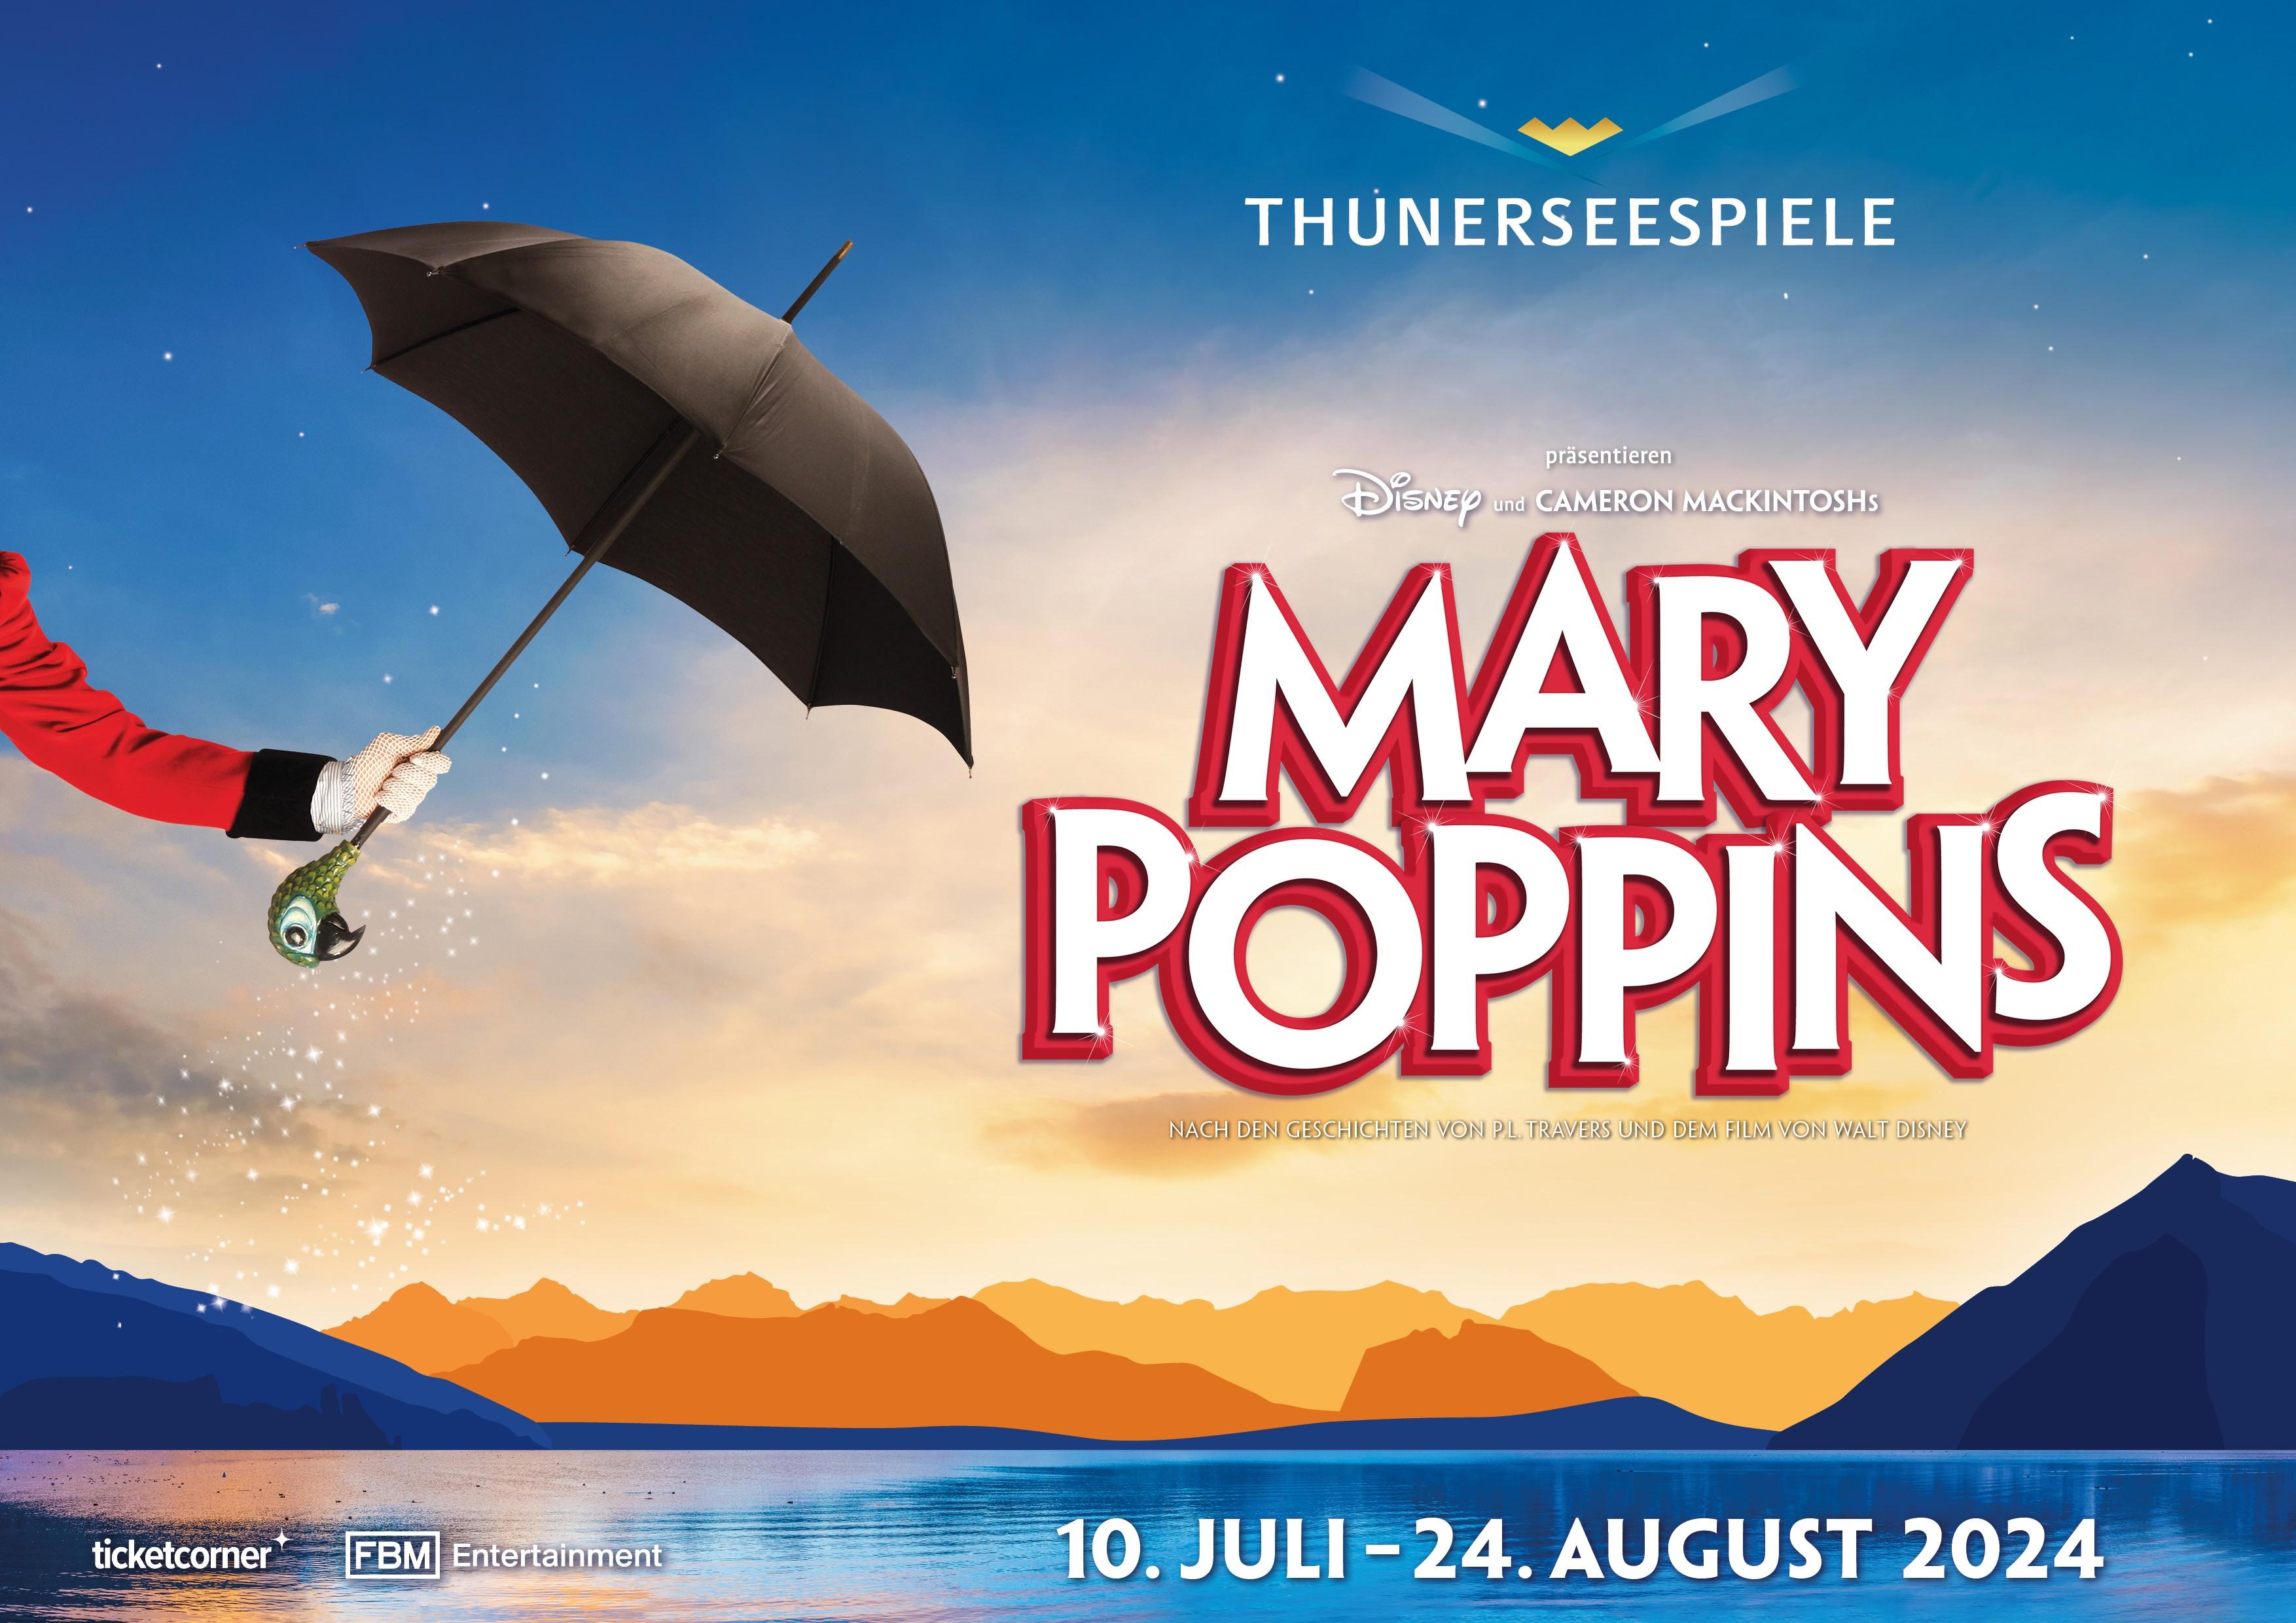  Flyer vom Musical Mary Poppins